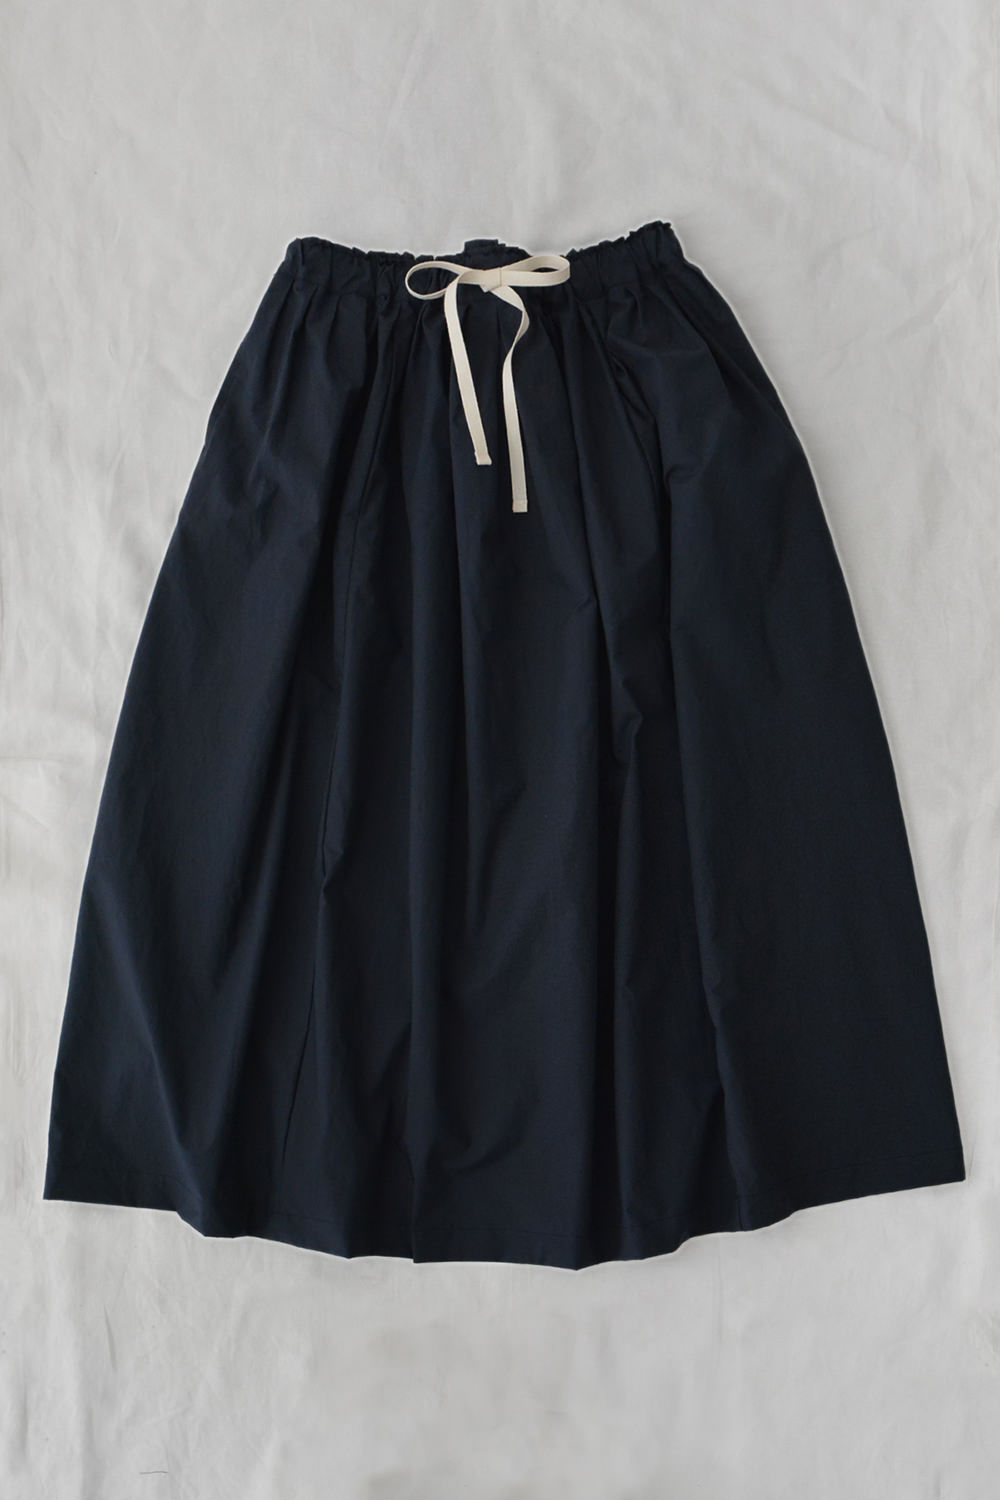 Cotton Skirt Lena Long Length Navy Top Picture